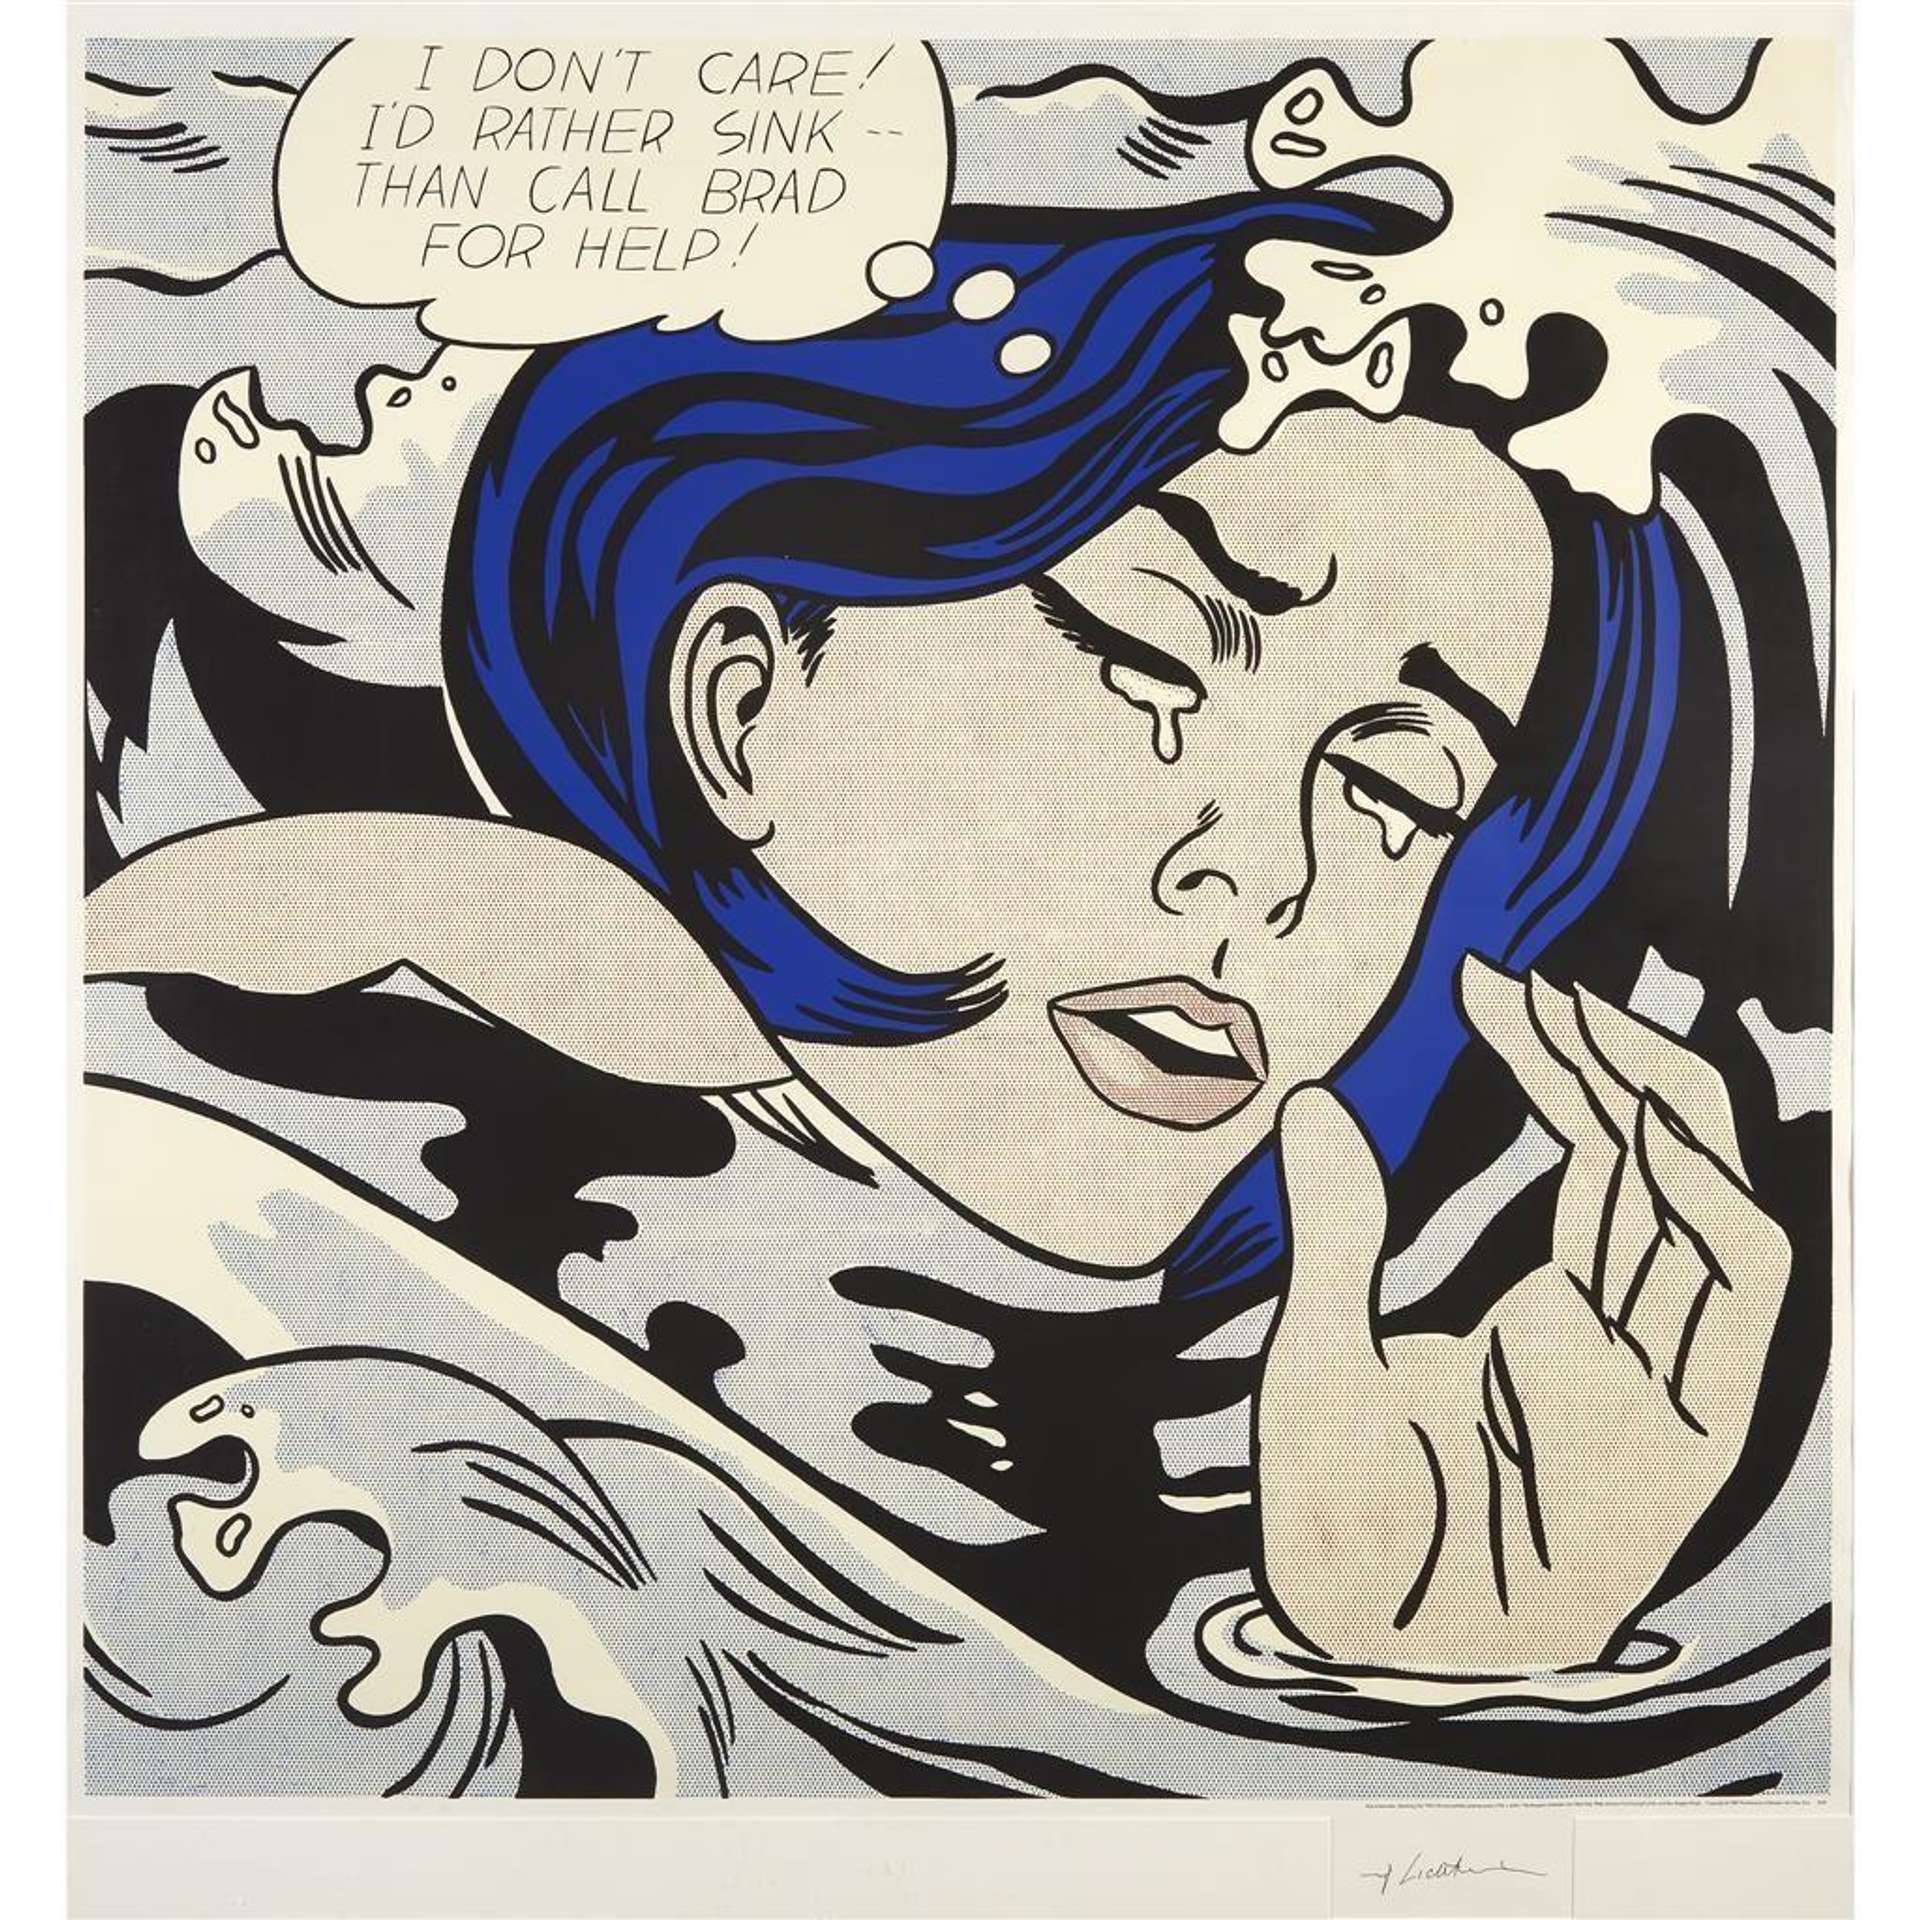 Roy Lichtenstein’s Drowning Girl Poster. A Pop Art screenprint of a reproduction of a comic strip with a woman with blue hair, in a large body of water with the text “I DON’T CARE! I’D RATHER SINK THAN CALL BRAD FOR HELP!”